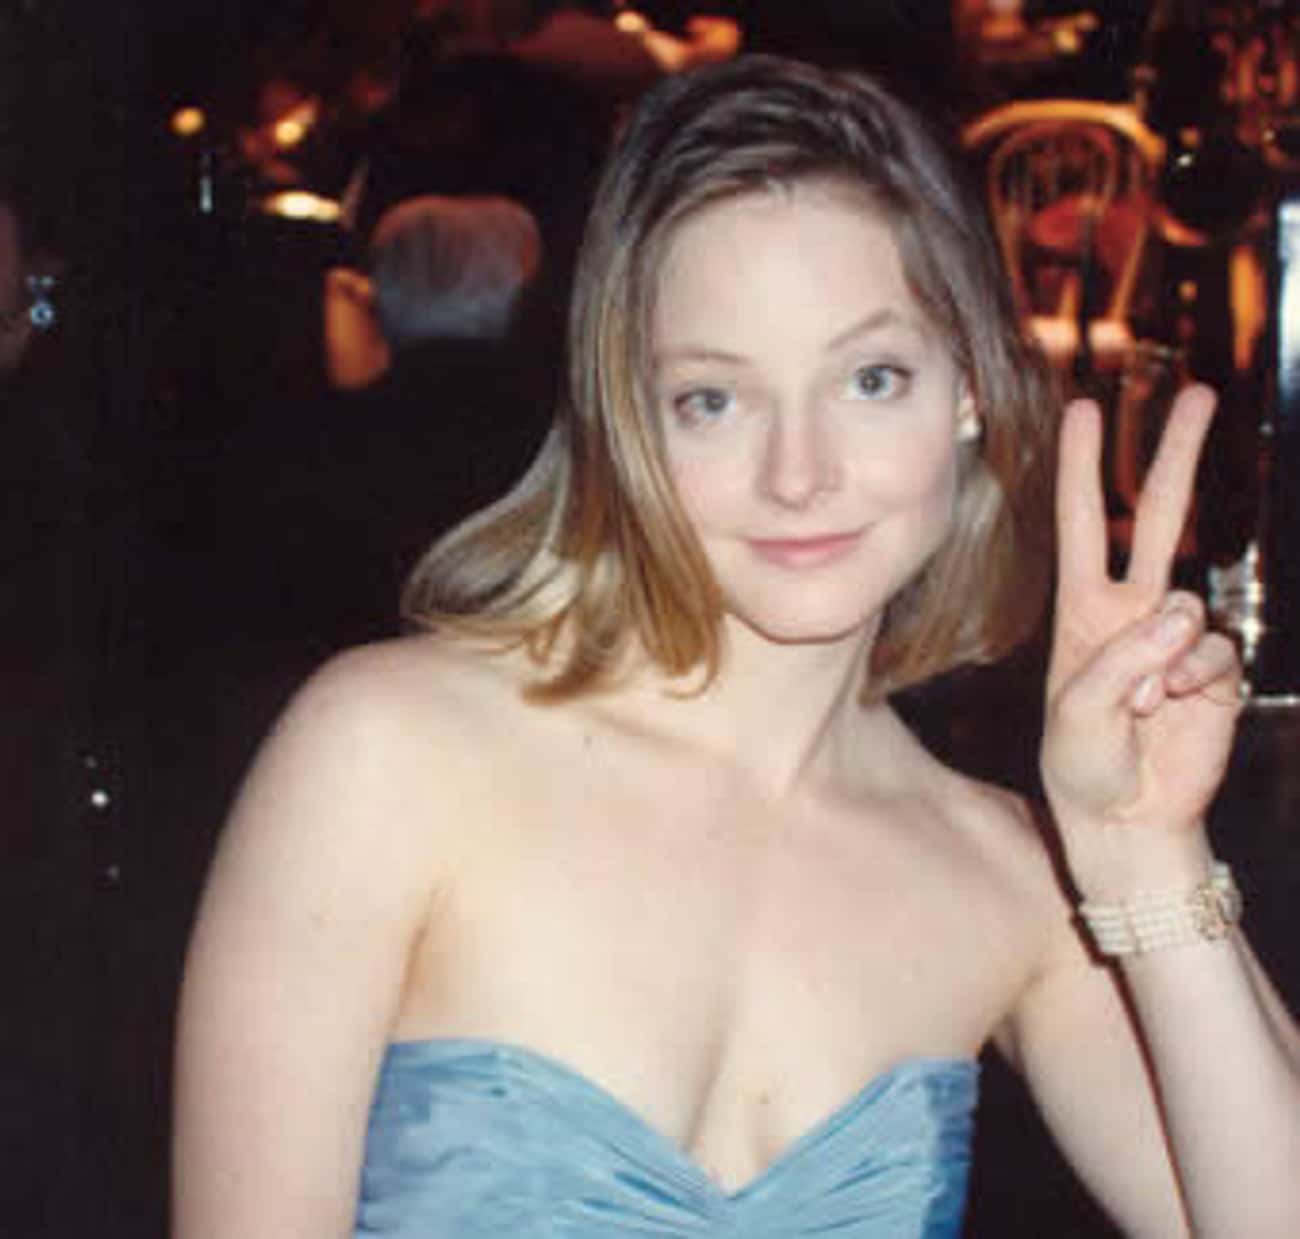 Young Jodie Foster in Lowcut Blue Dress